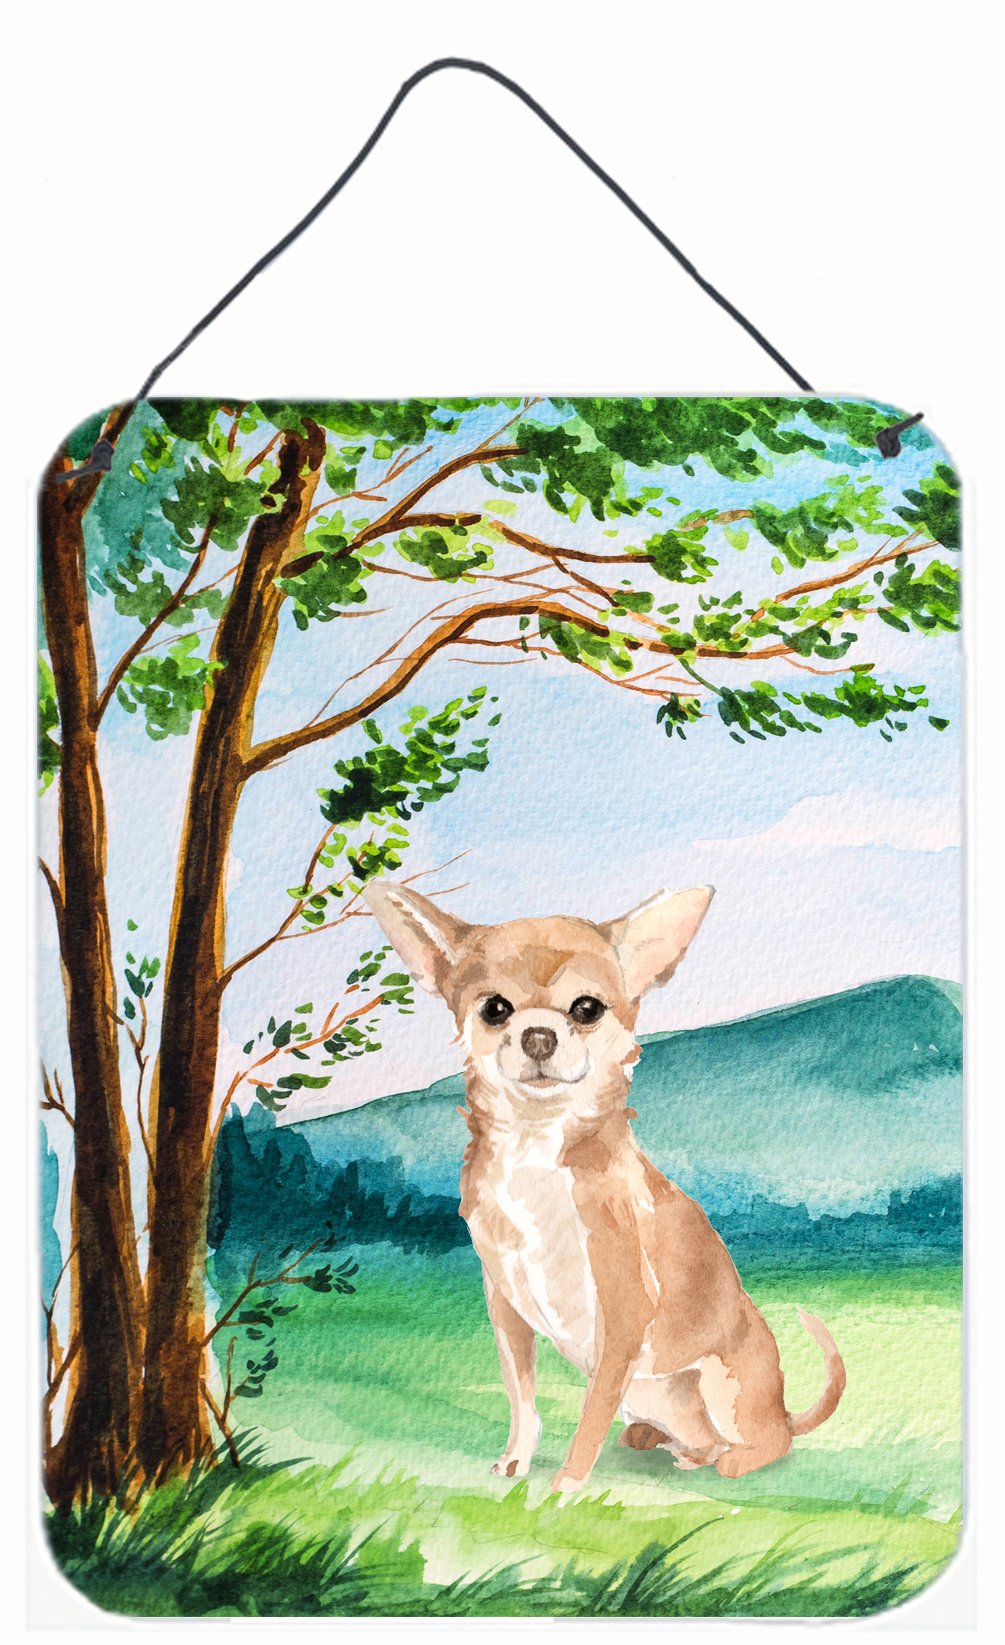 Under the Tree Chihuahua Wall or Door Hanging Prints CK2018DS1216 by Caroline's Treasures